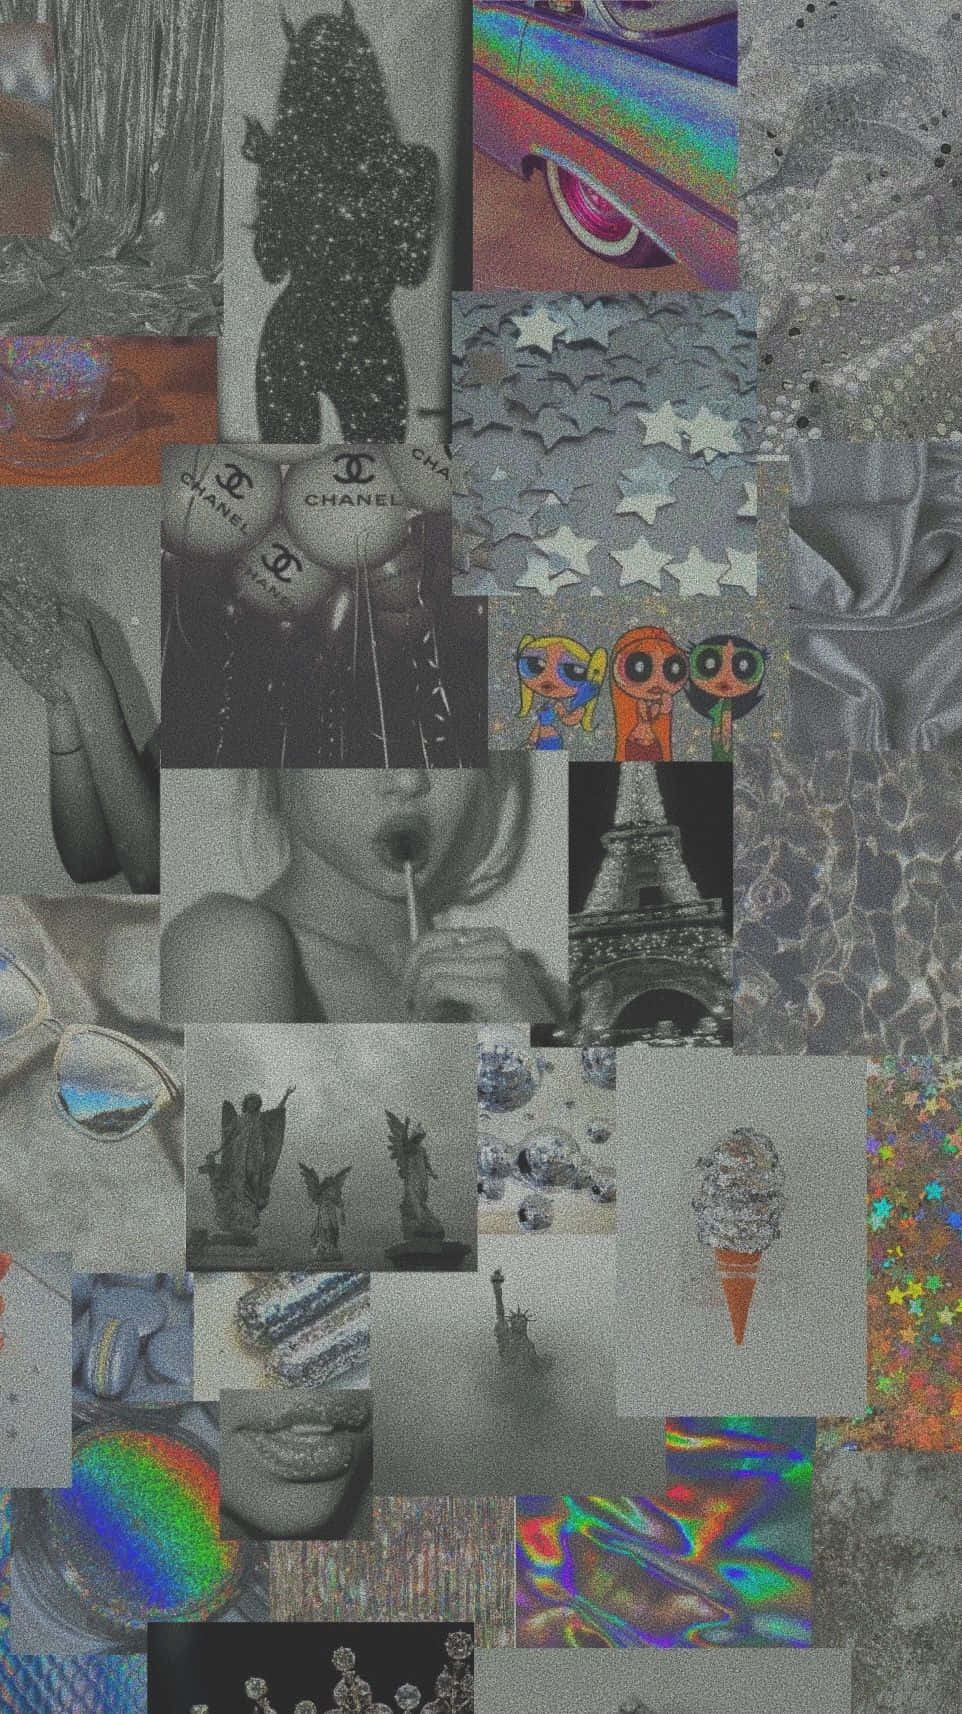 Silver Aesthetic Collage Wallpaper